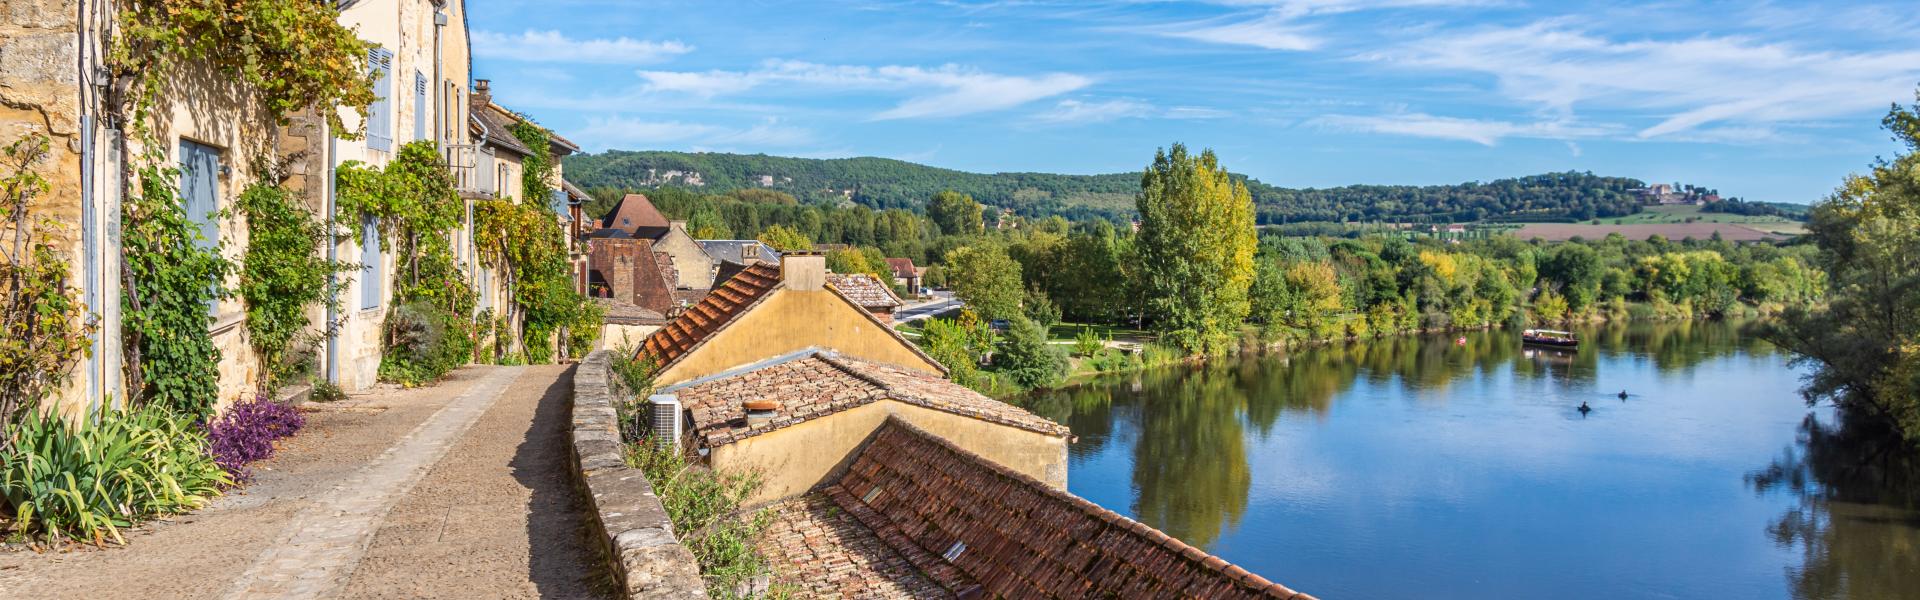 Holiday chalets from which to enjoy the delights of Dordogne - Casamundo